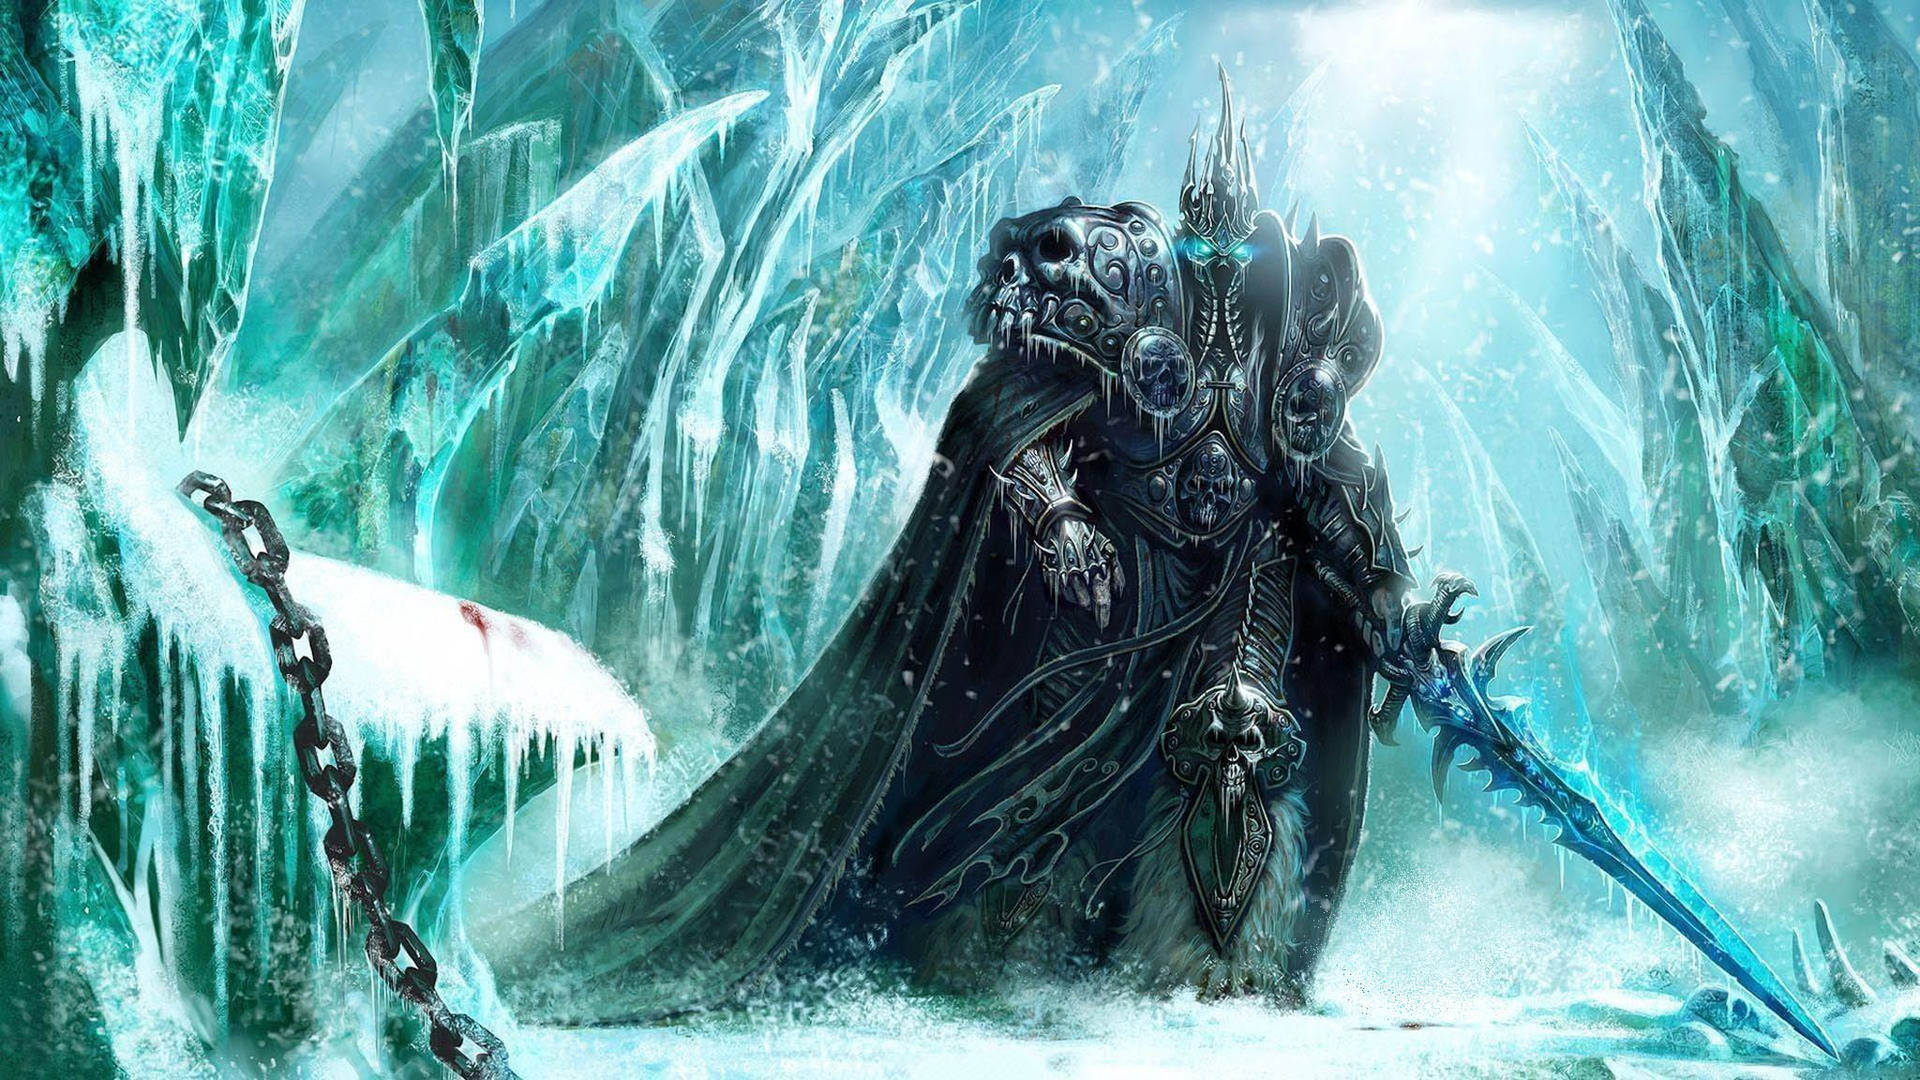 Wrath Of The Lich King Background Wallpaper